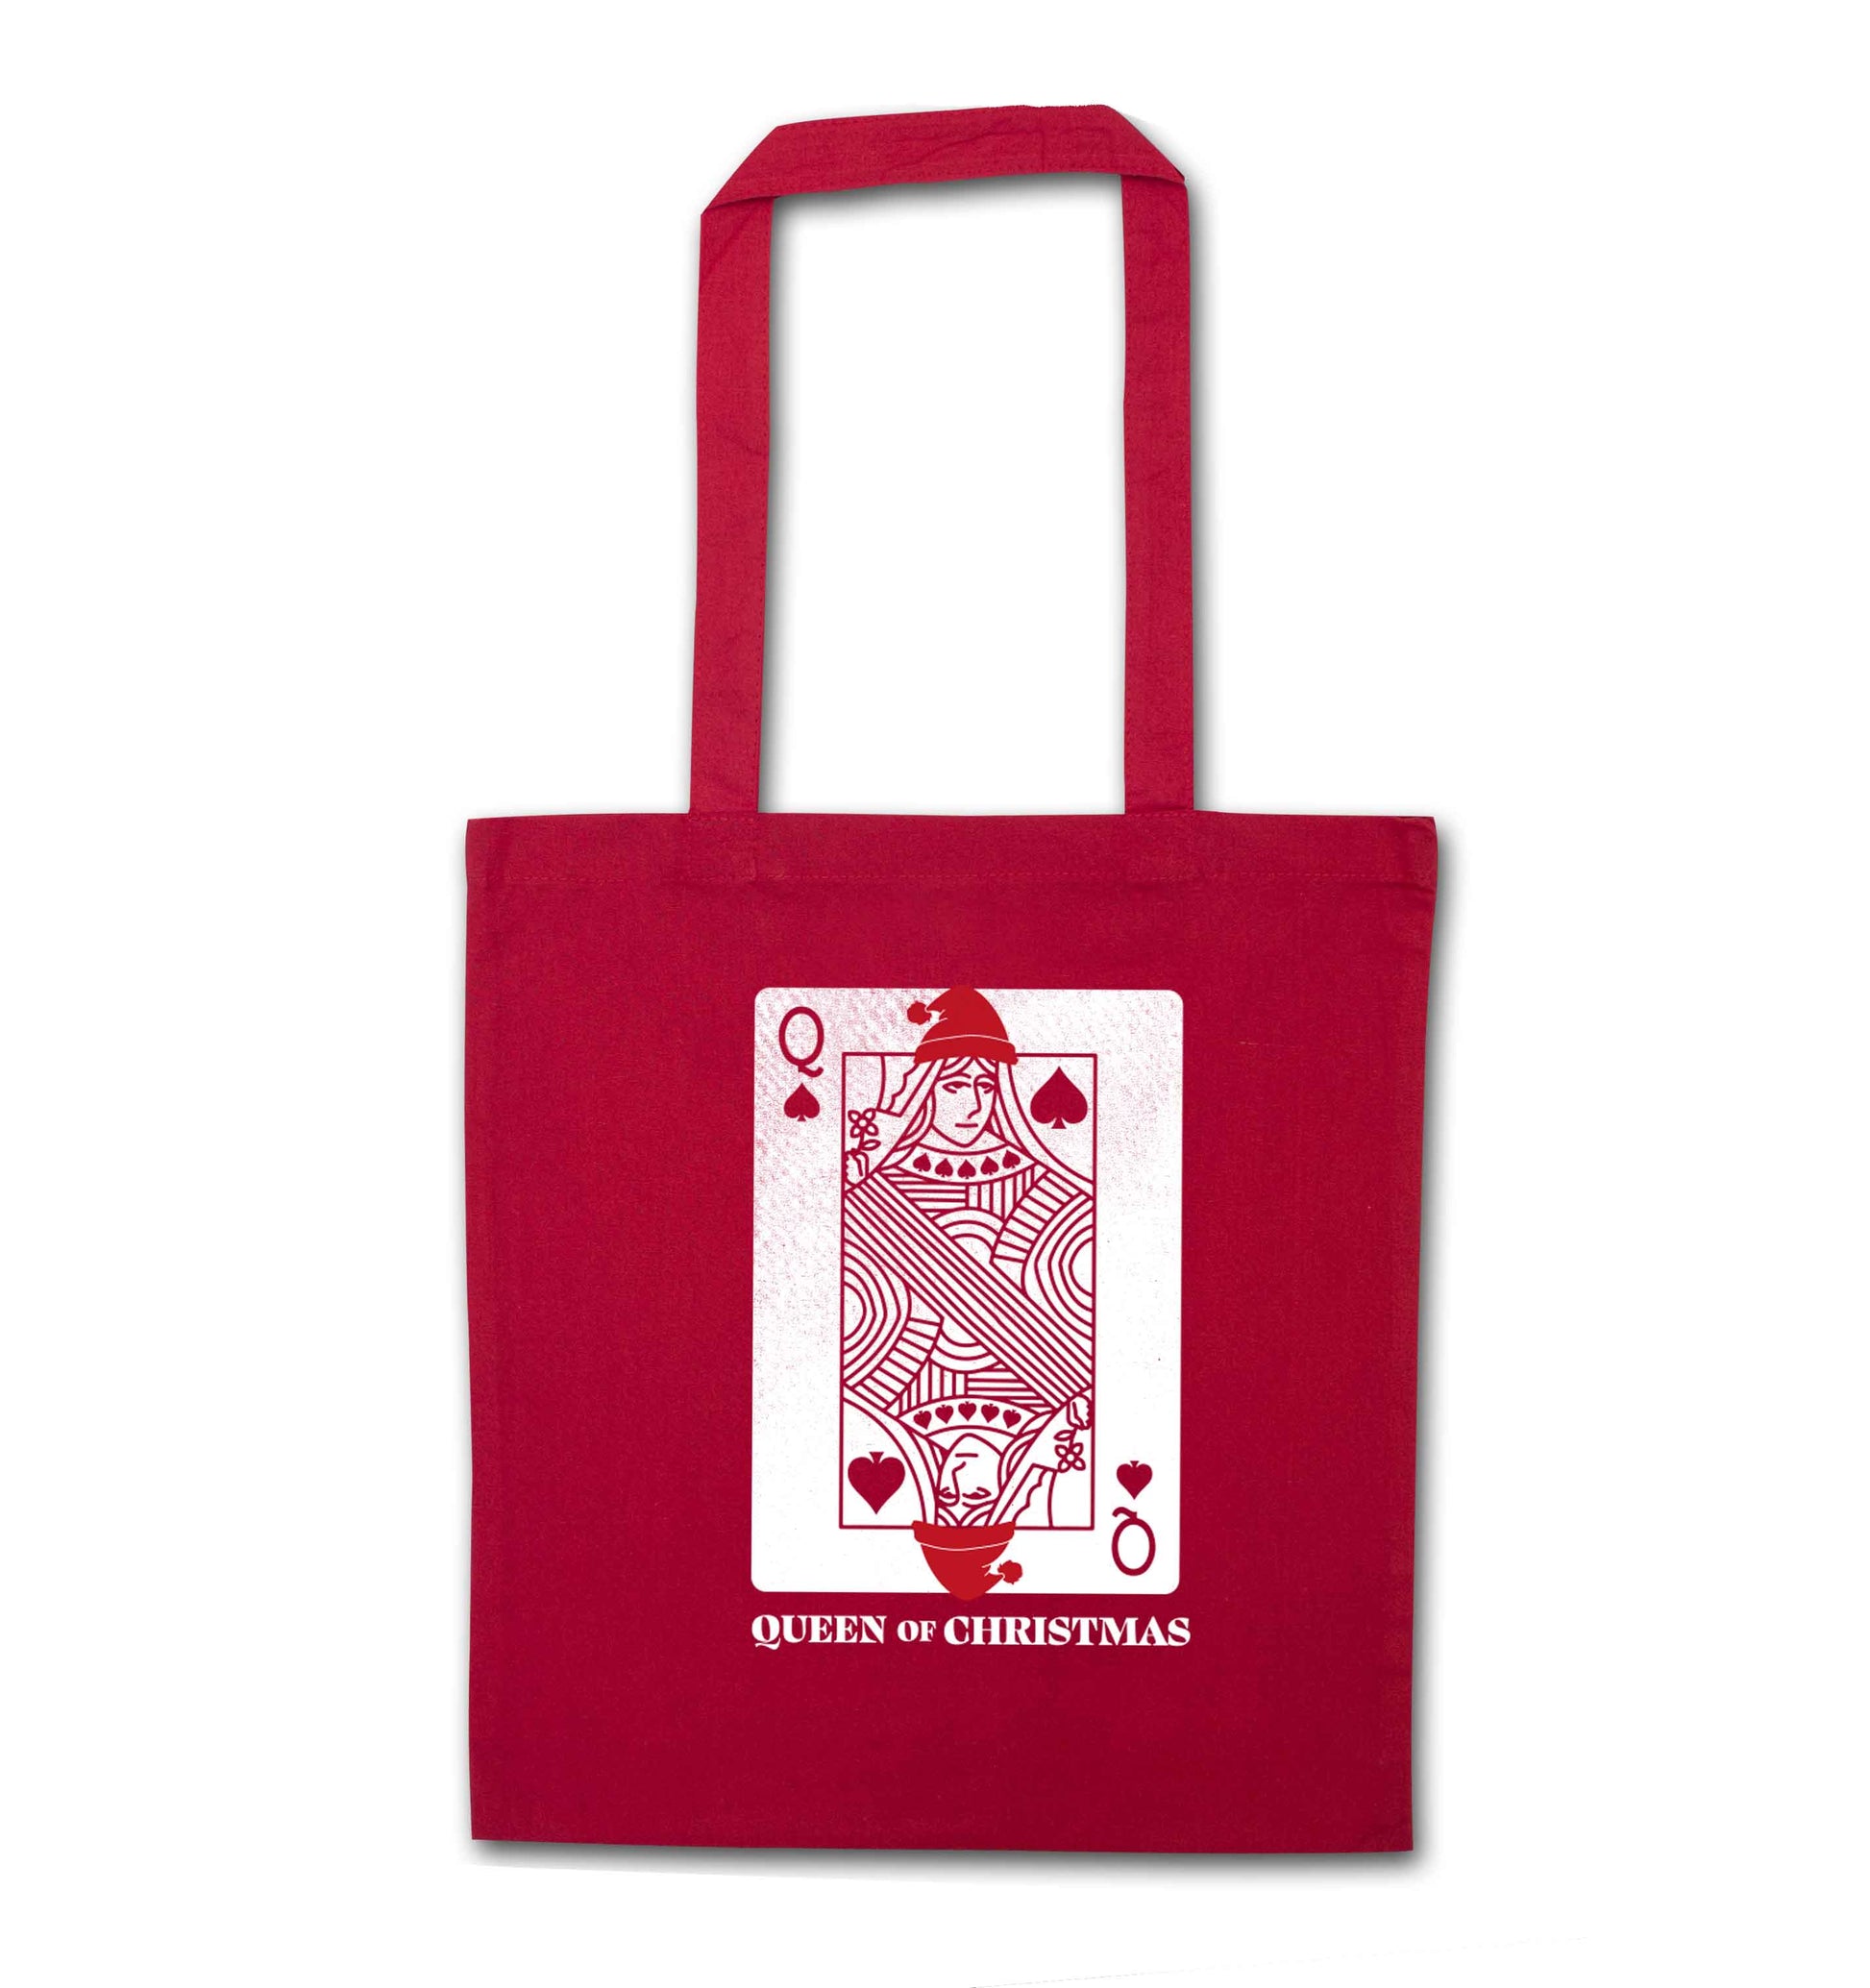 Queen of christmas red tote bag